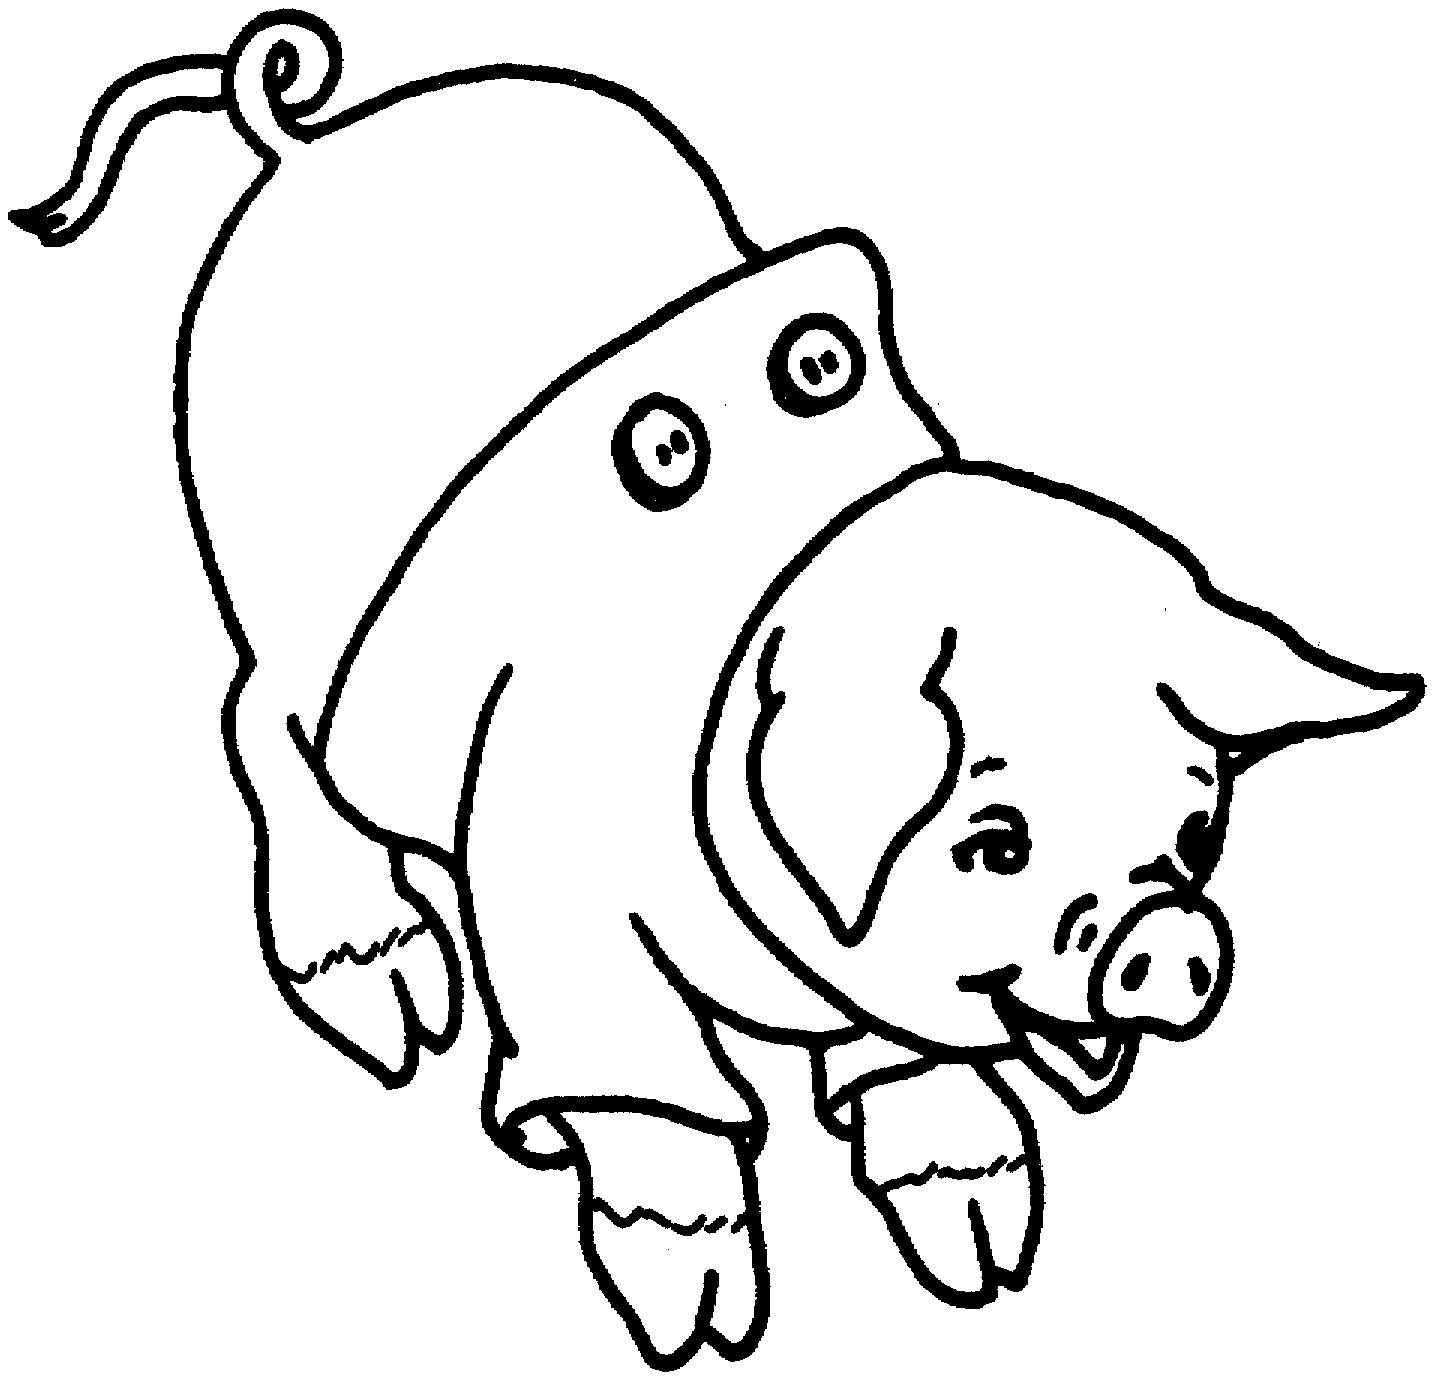 Cute Baby Pig Coloring Pages
 Free Printable Pig Coloring Pages For Kids